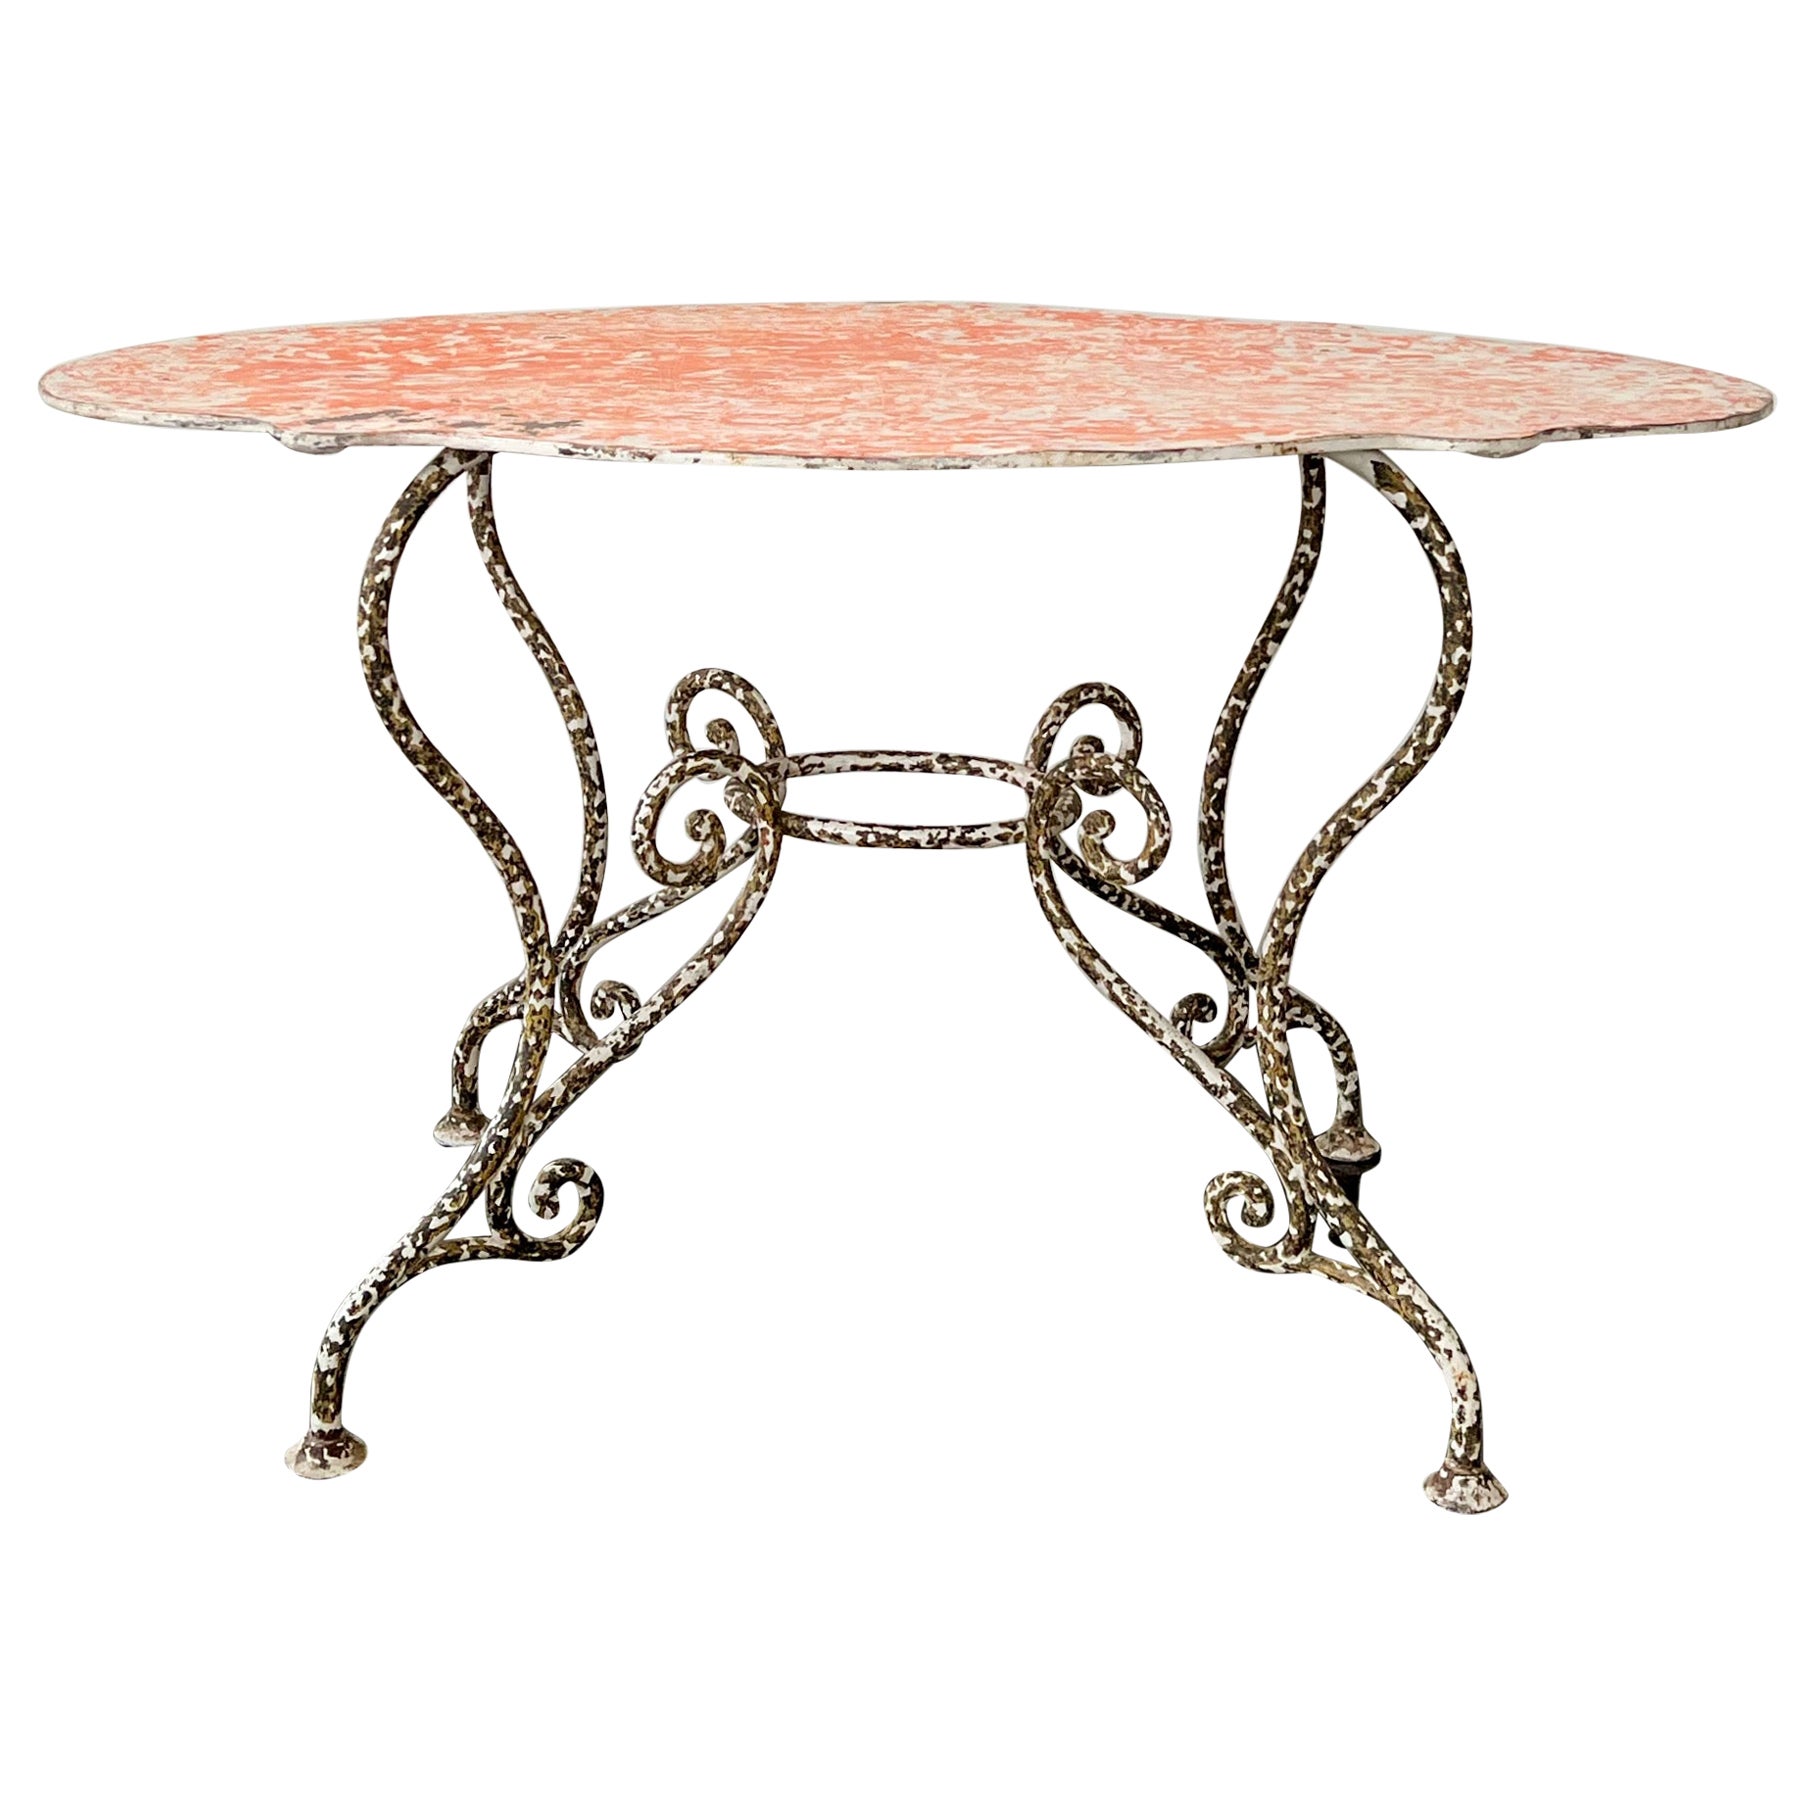 Antique Large French Iron Garden Table with Shaped Top